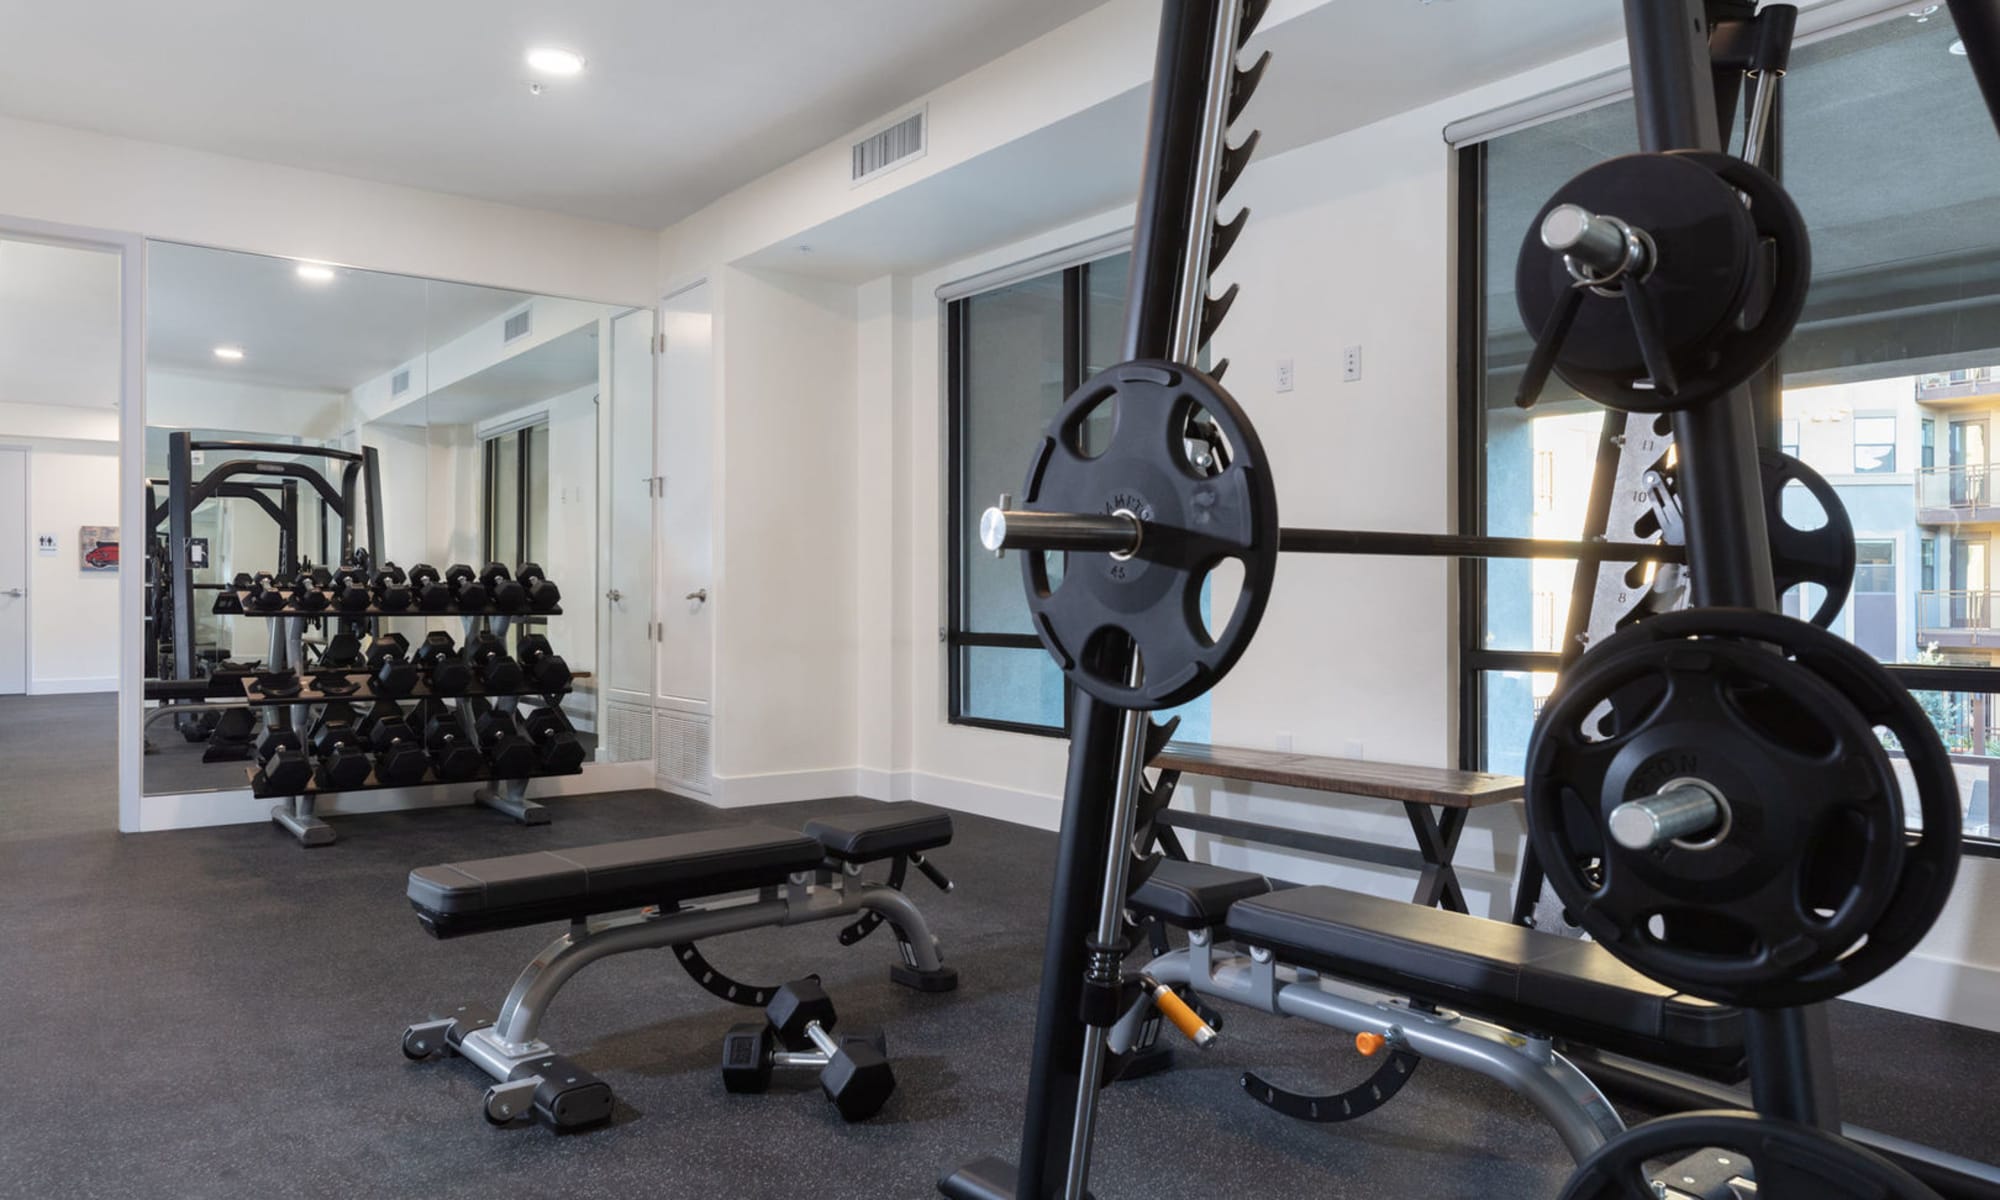 Gym room at Sunsweet in Morgan Hill, California